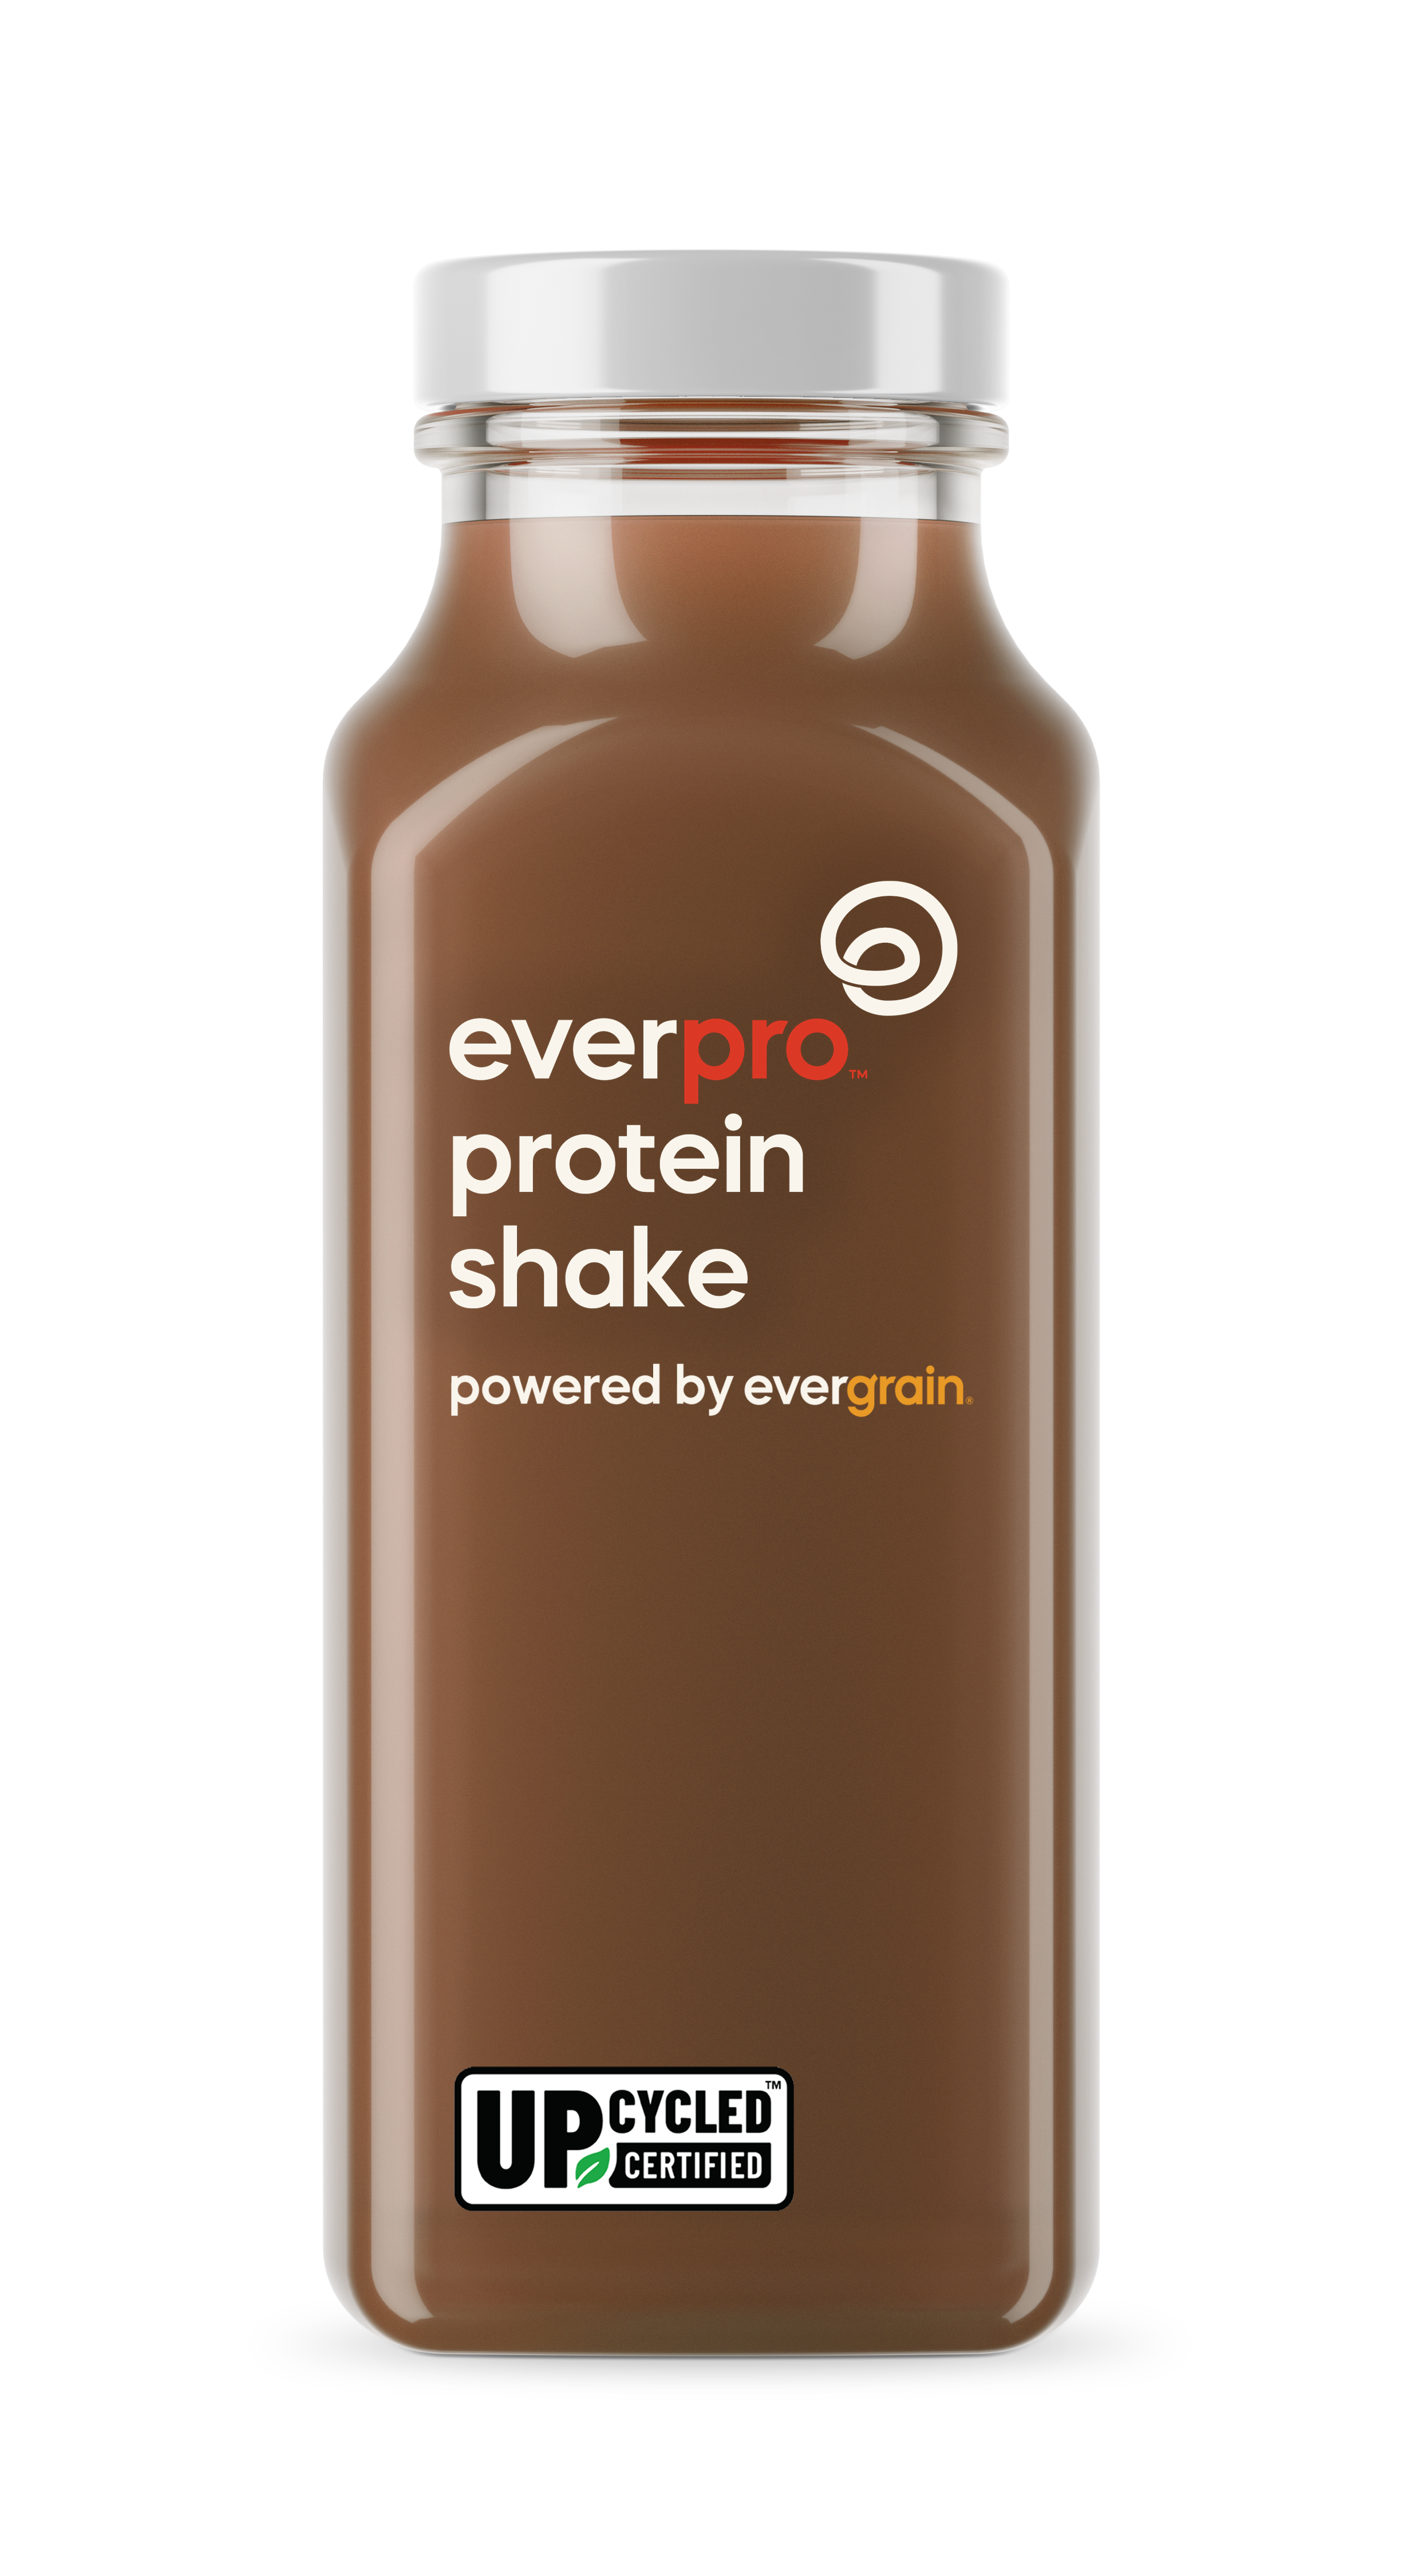 Prototype of a package featuring EverPro's branding and Upcycled Food Association certification mark. Photo from EverGrain.